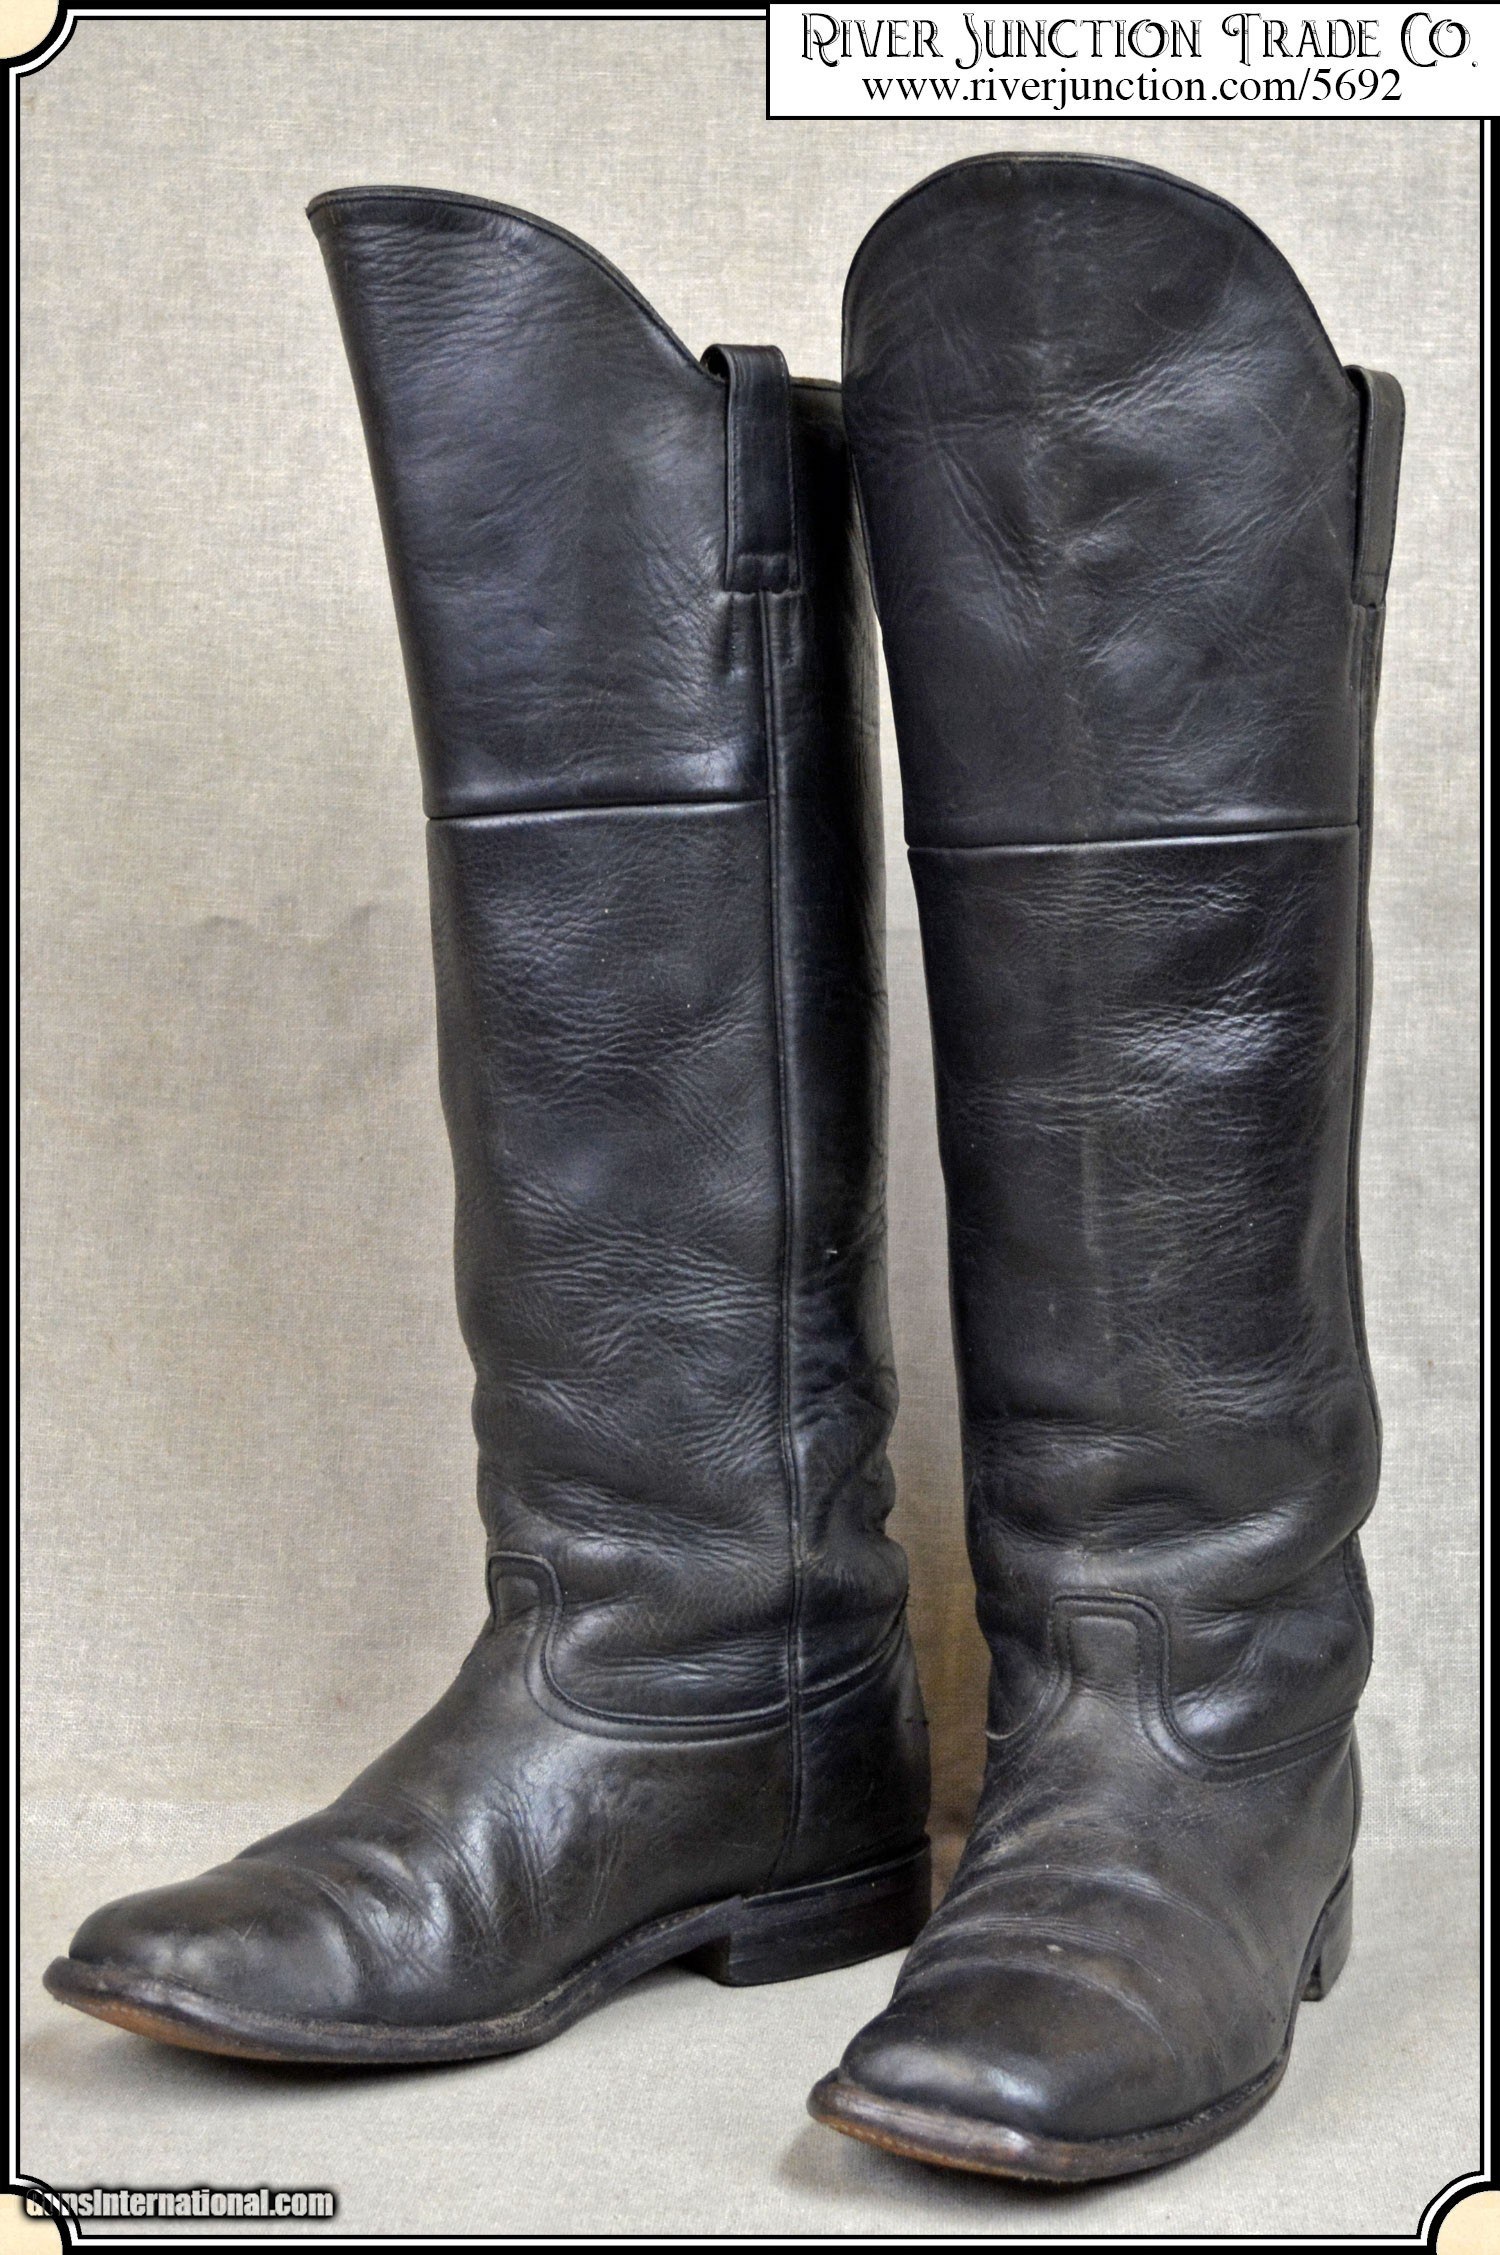 Used 1860s-style Cavalry Boot Size 10-10 1/2 D